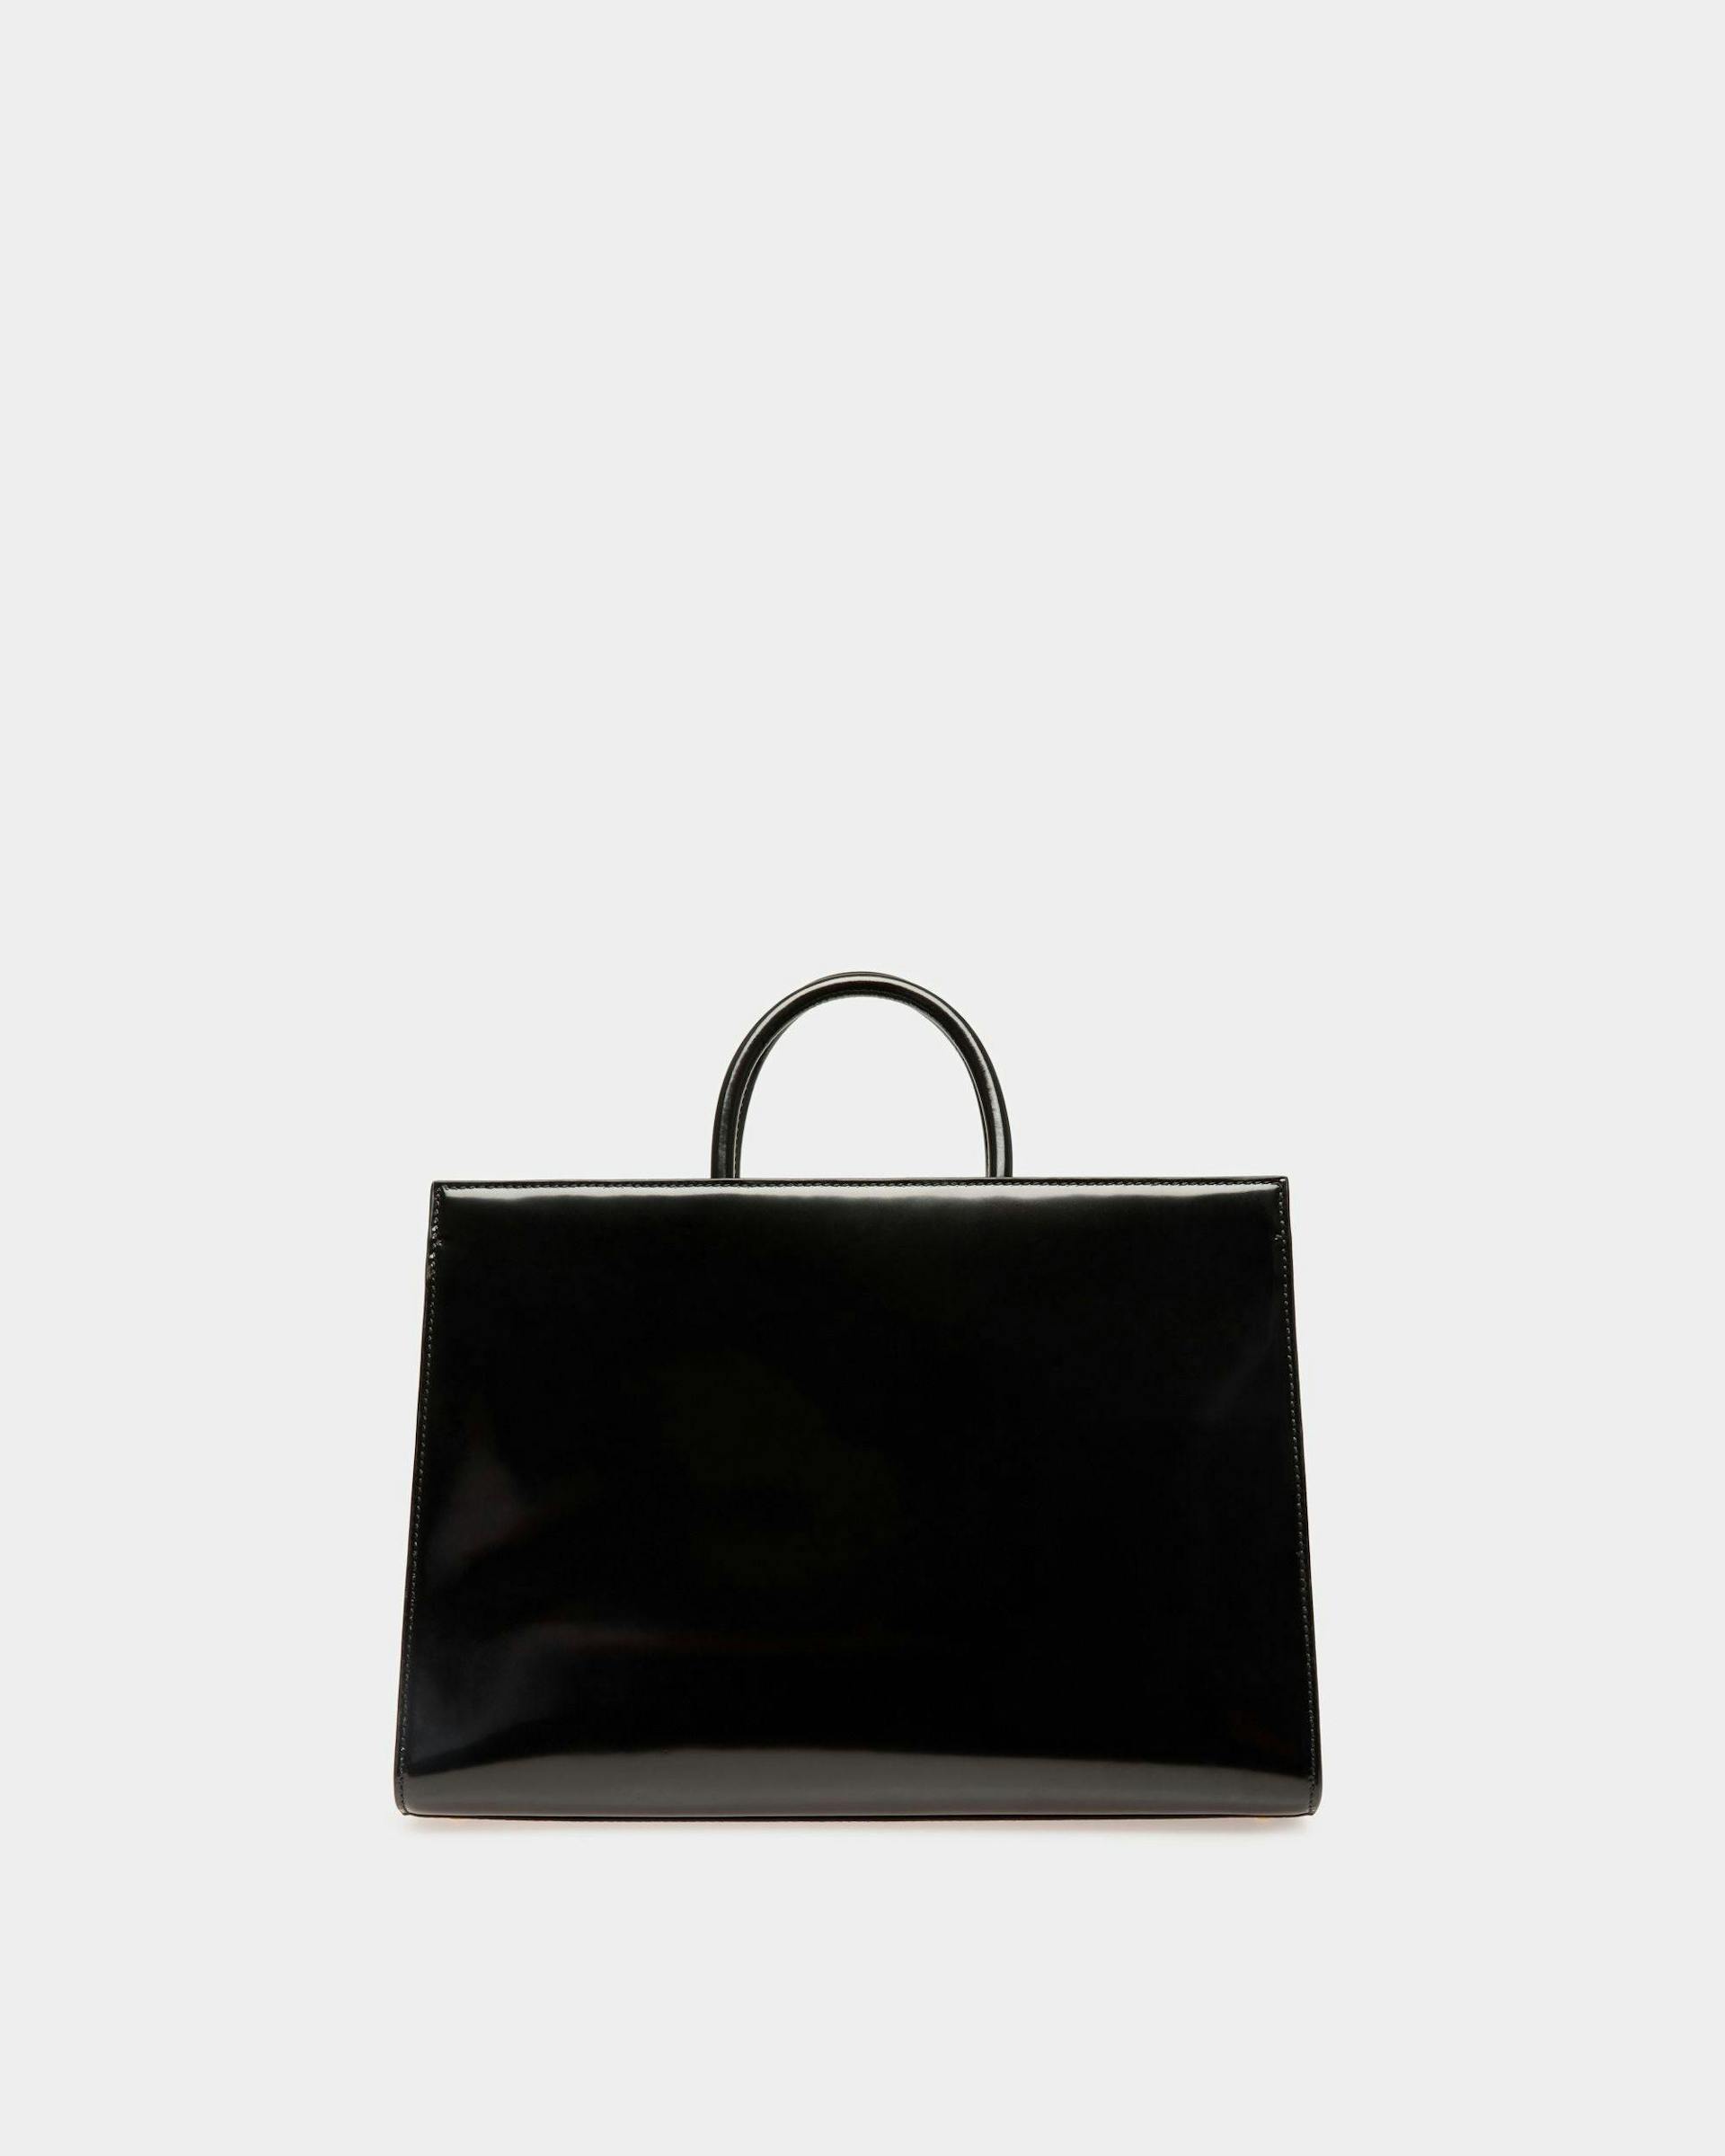 Women's Emblem Tote Bag In Black Patent Leather | Bally | Still Life Back